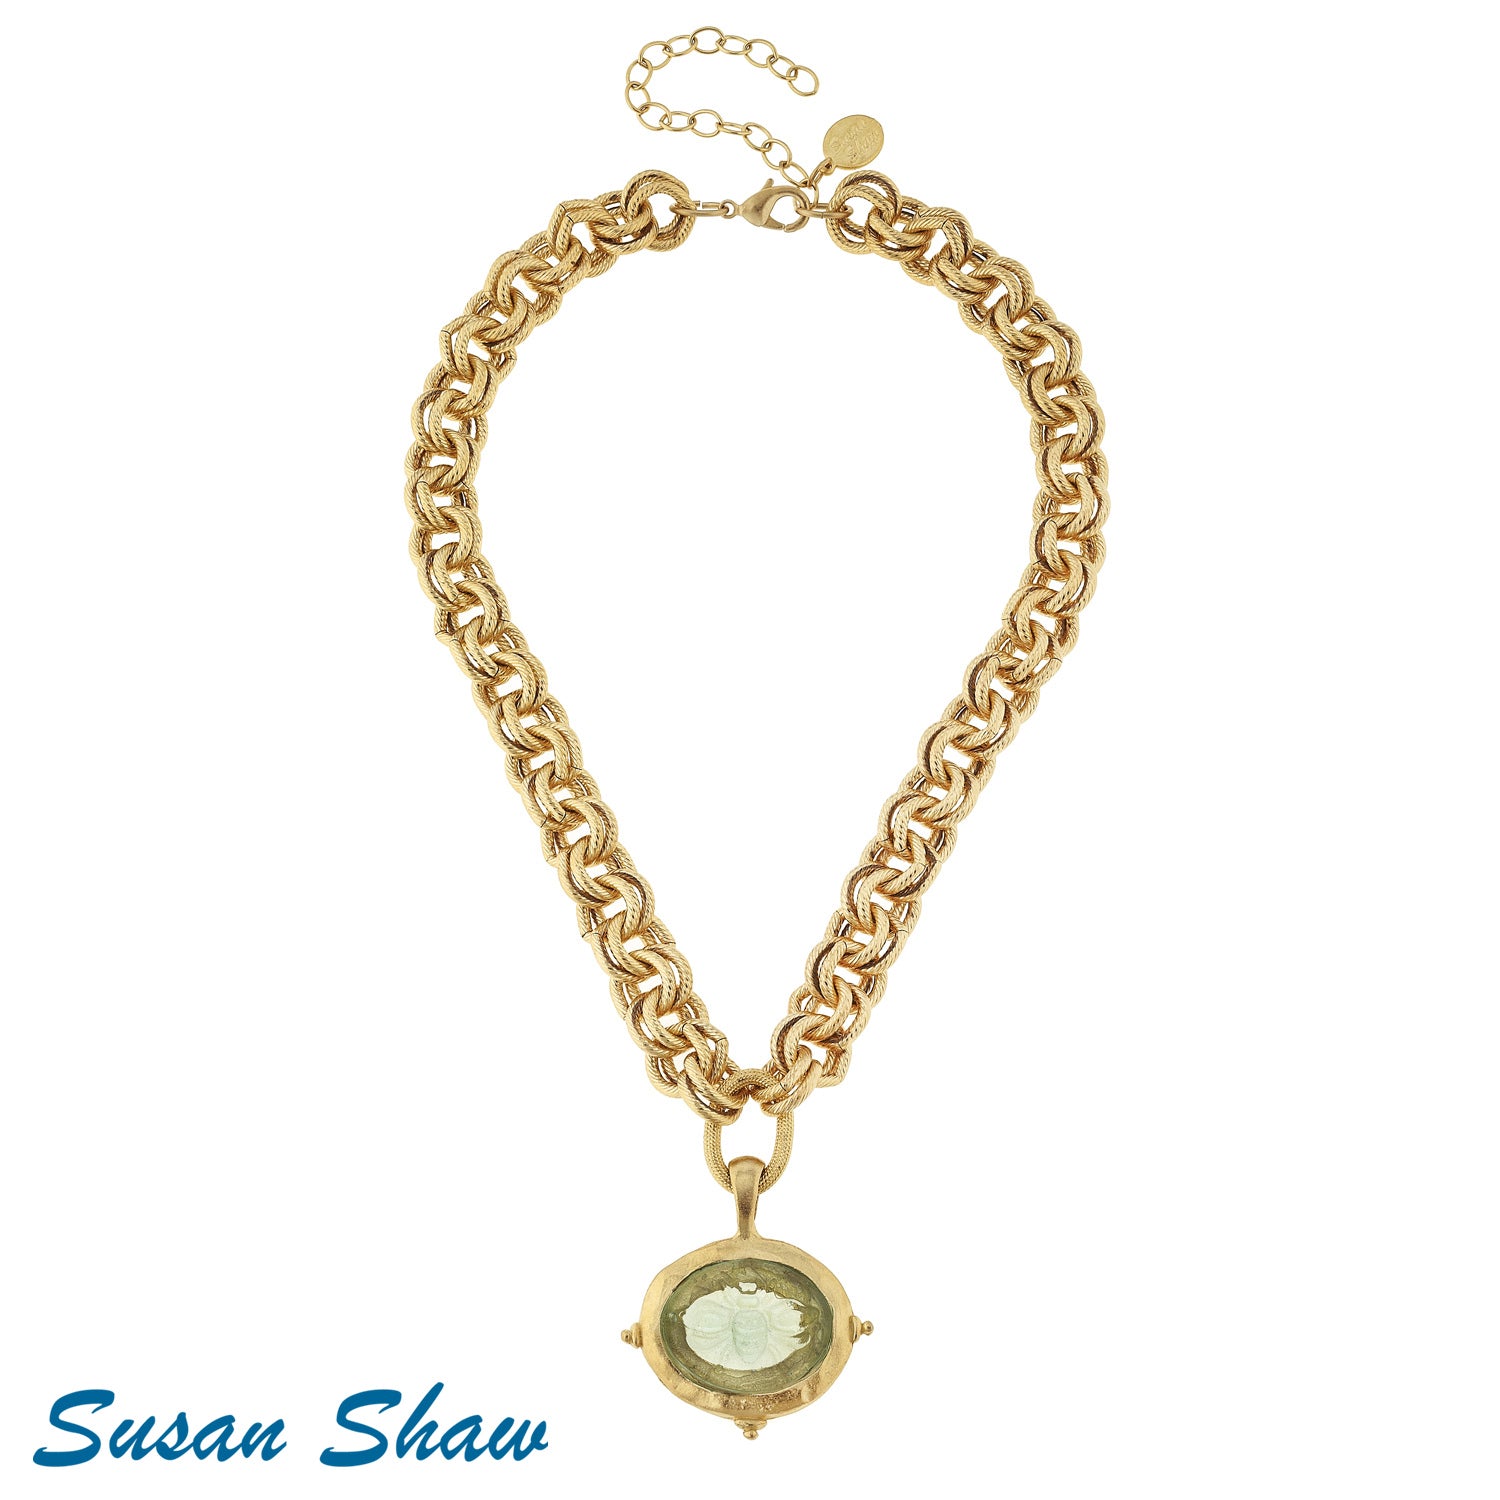 Susan Shaw Clear Venetian Glass Bee Intaglio on Gold Chain Necklace